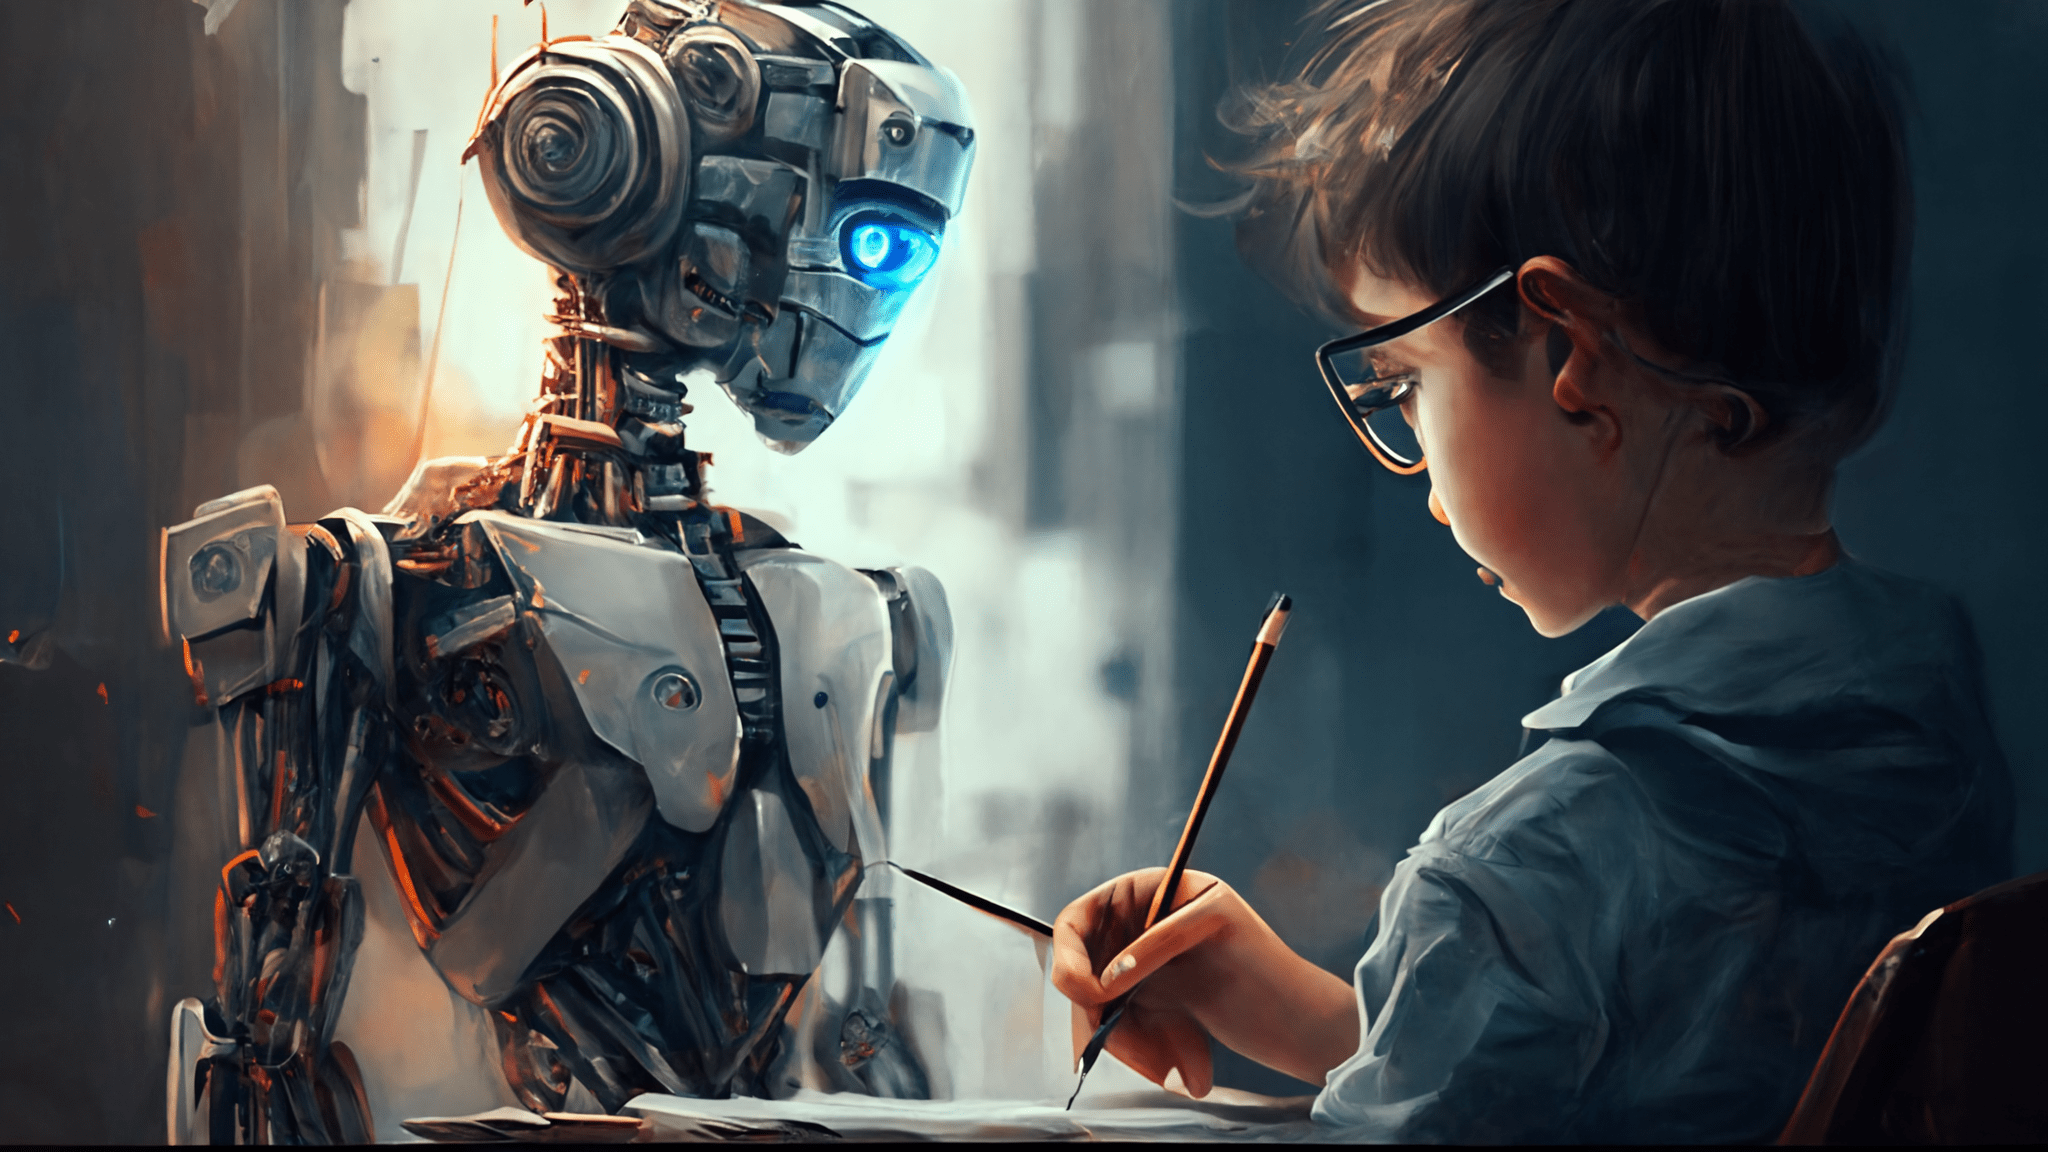 A young boy engaged in learning from a friendly, interactive robot, illustrating the practical application of artificial intelligence in education and business growth.